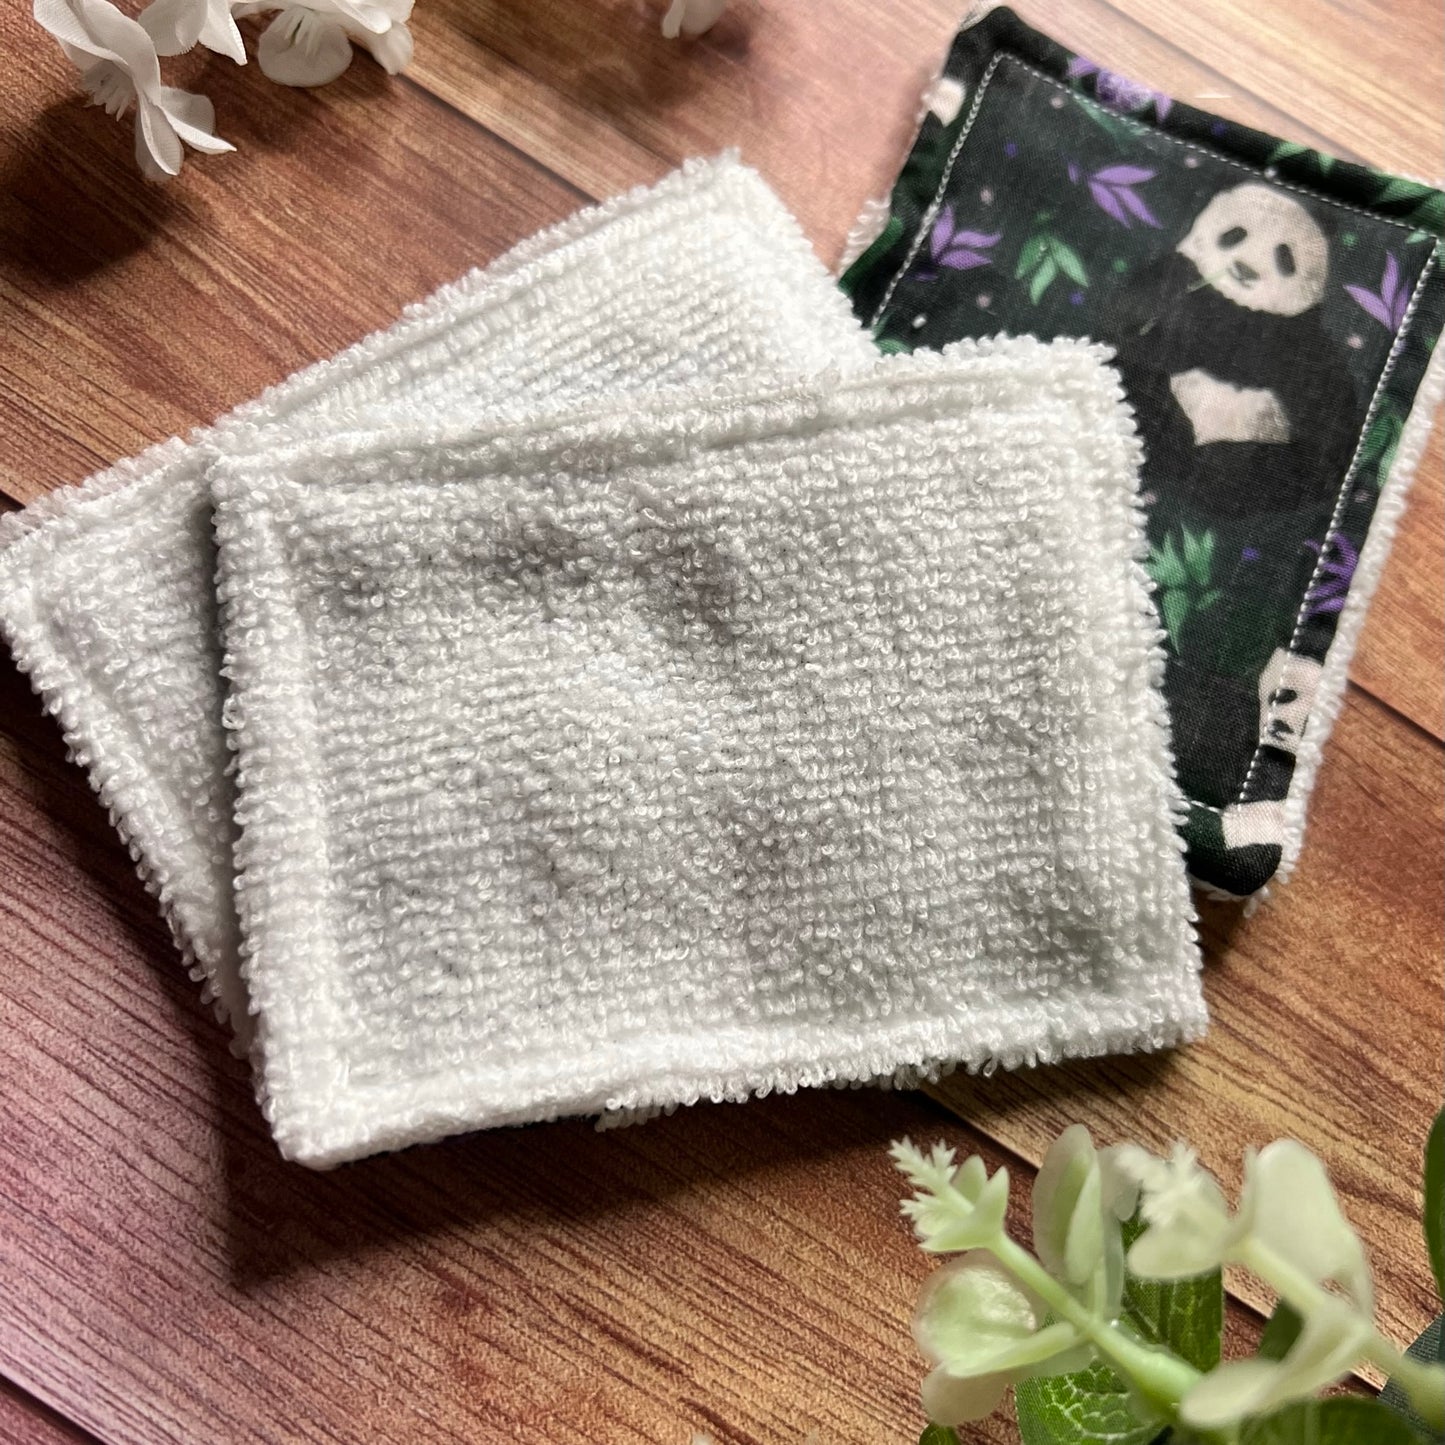 textured towelling on the back of these exfoliating face pads, which make for a great panda gift idea